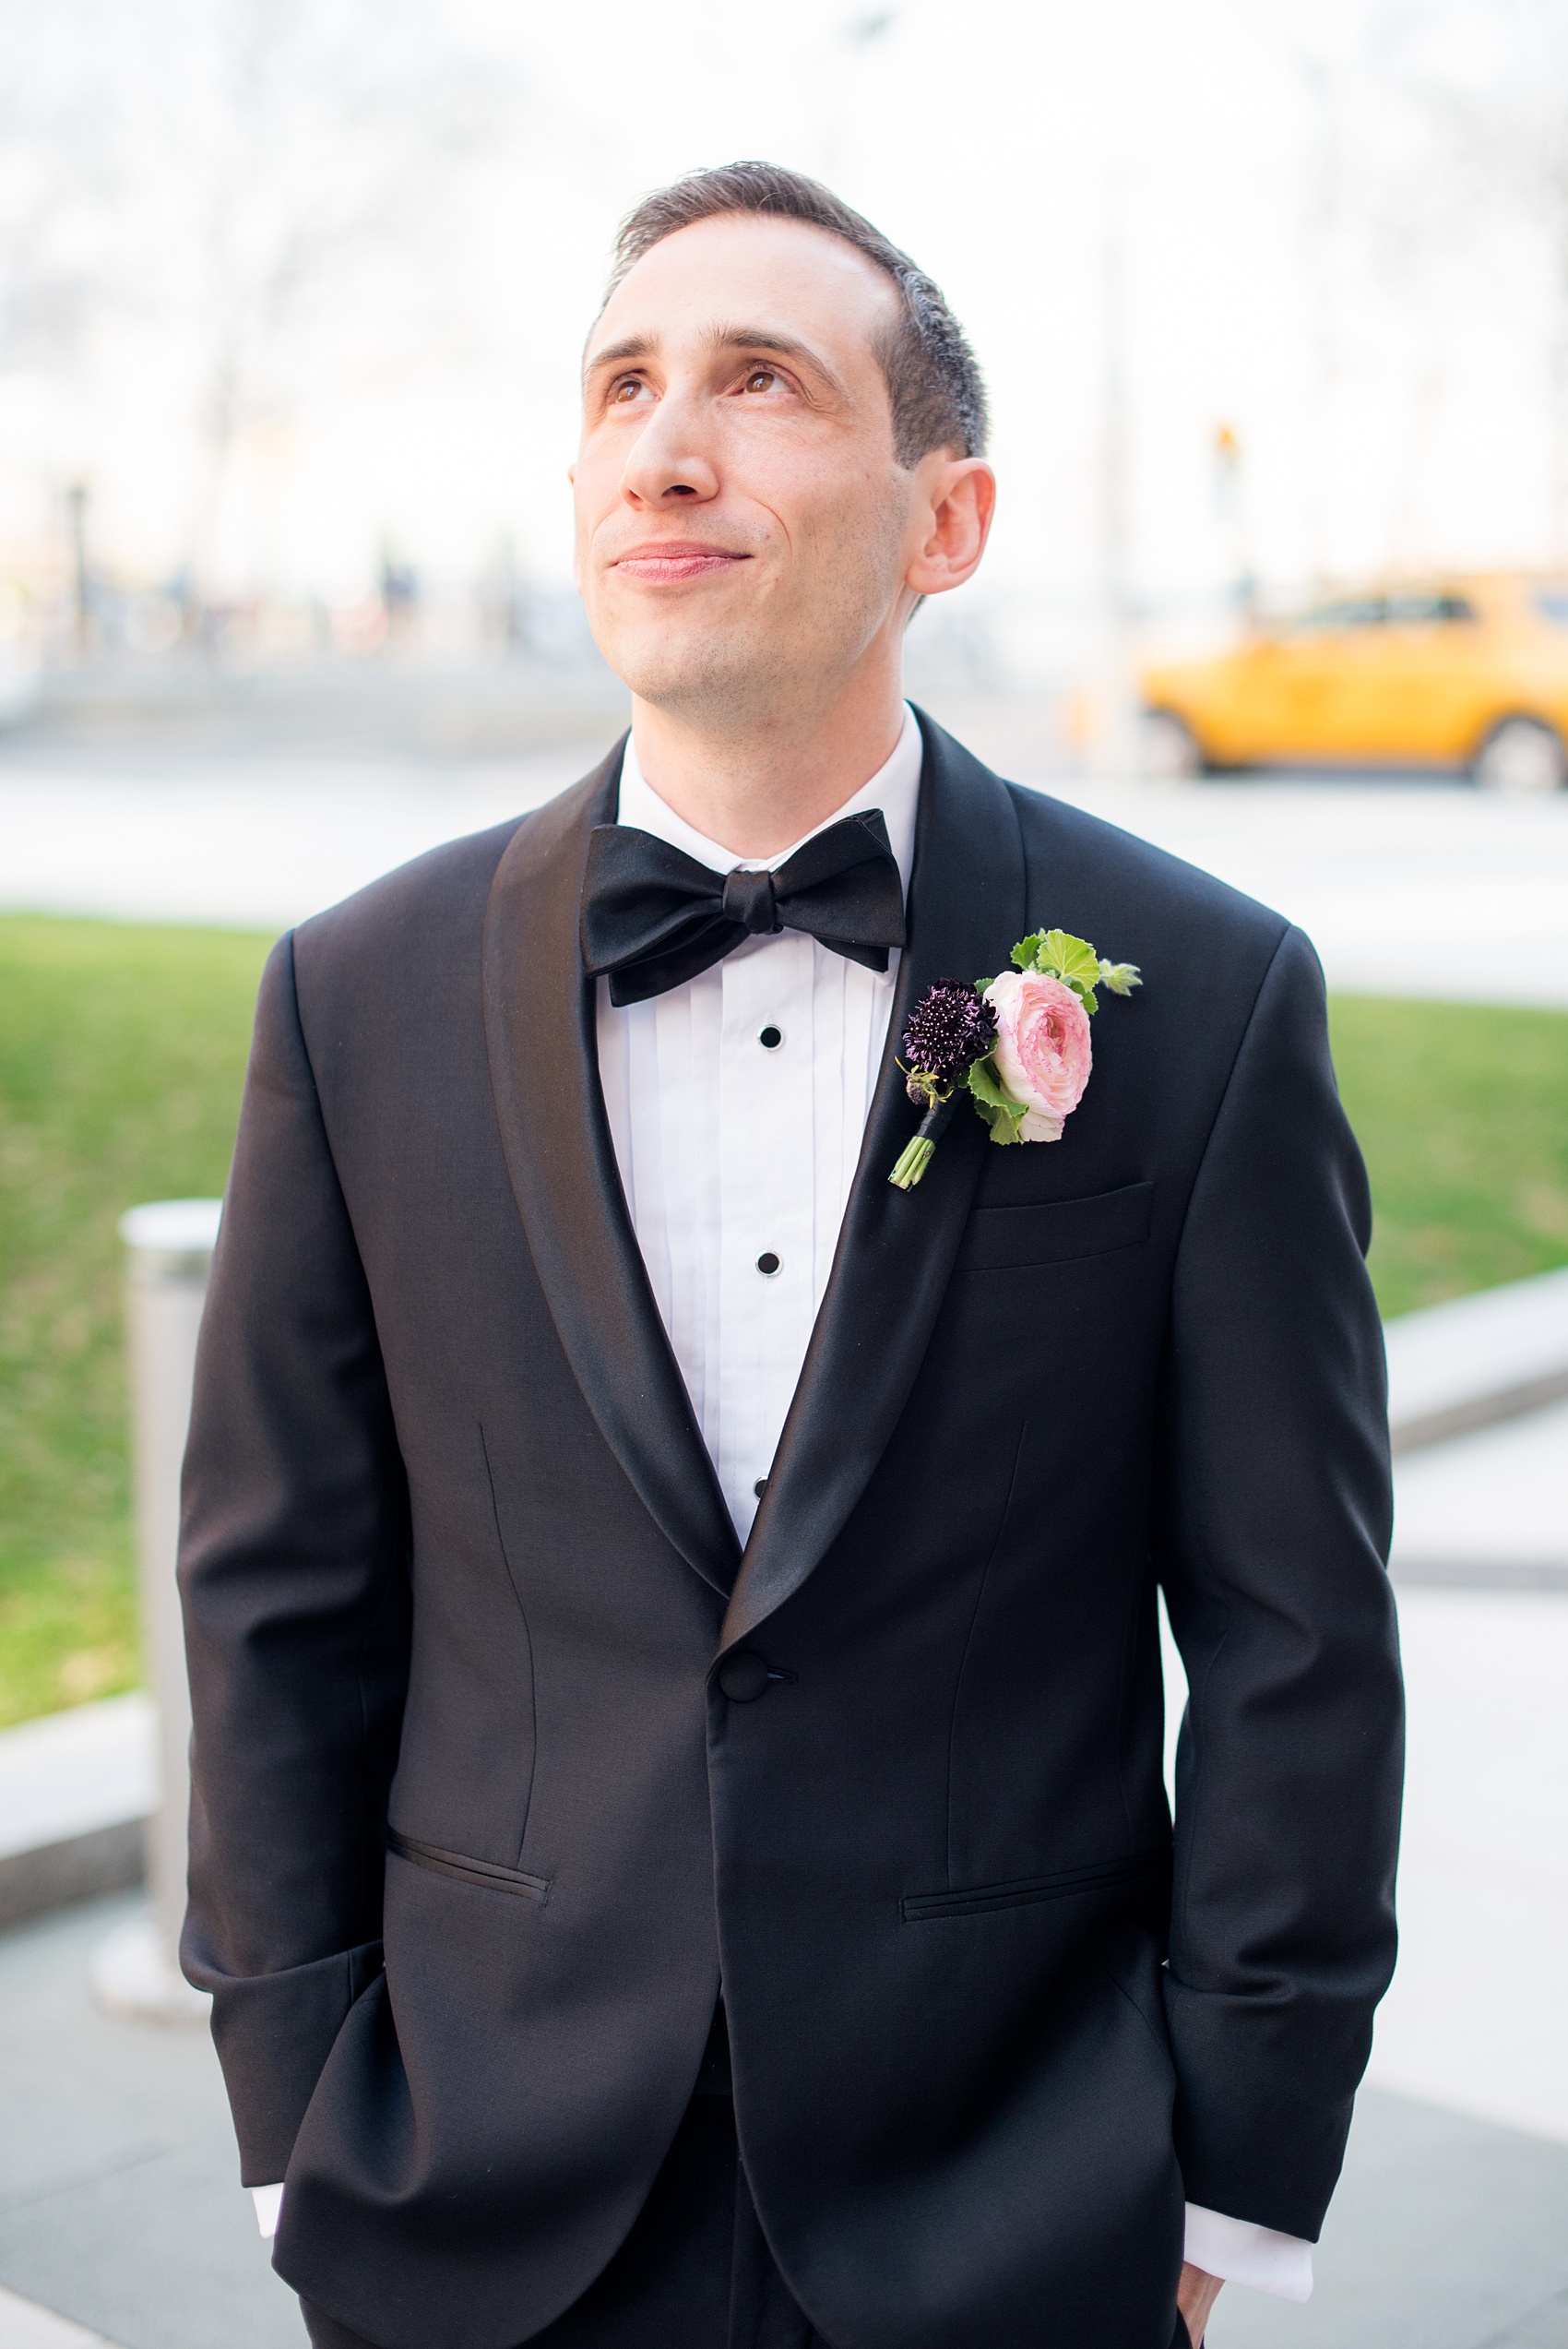 W Hoboken wedding photos by Mikkel Paige Photography. Pictures in this well known New Jersey area with a view of the Manhattan skyline. The groom awaited his bride for their first look outside of the venue. #mikkelpaige #HobokenWedding #NewJerseyPhotographer #NewYorkCityPhotographer #NYCweddingphotographer #brideandgroomphotos #redpeonies #romanticwedding #springwedding #CityWedding